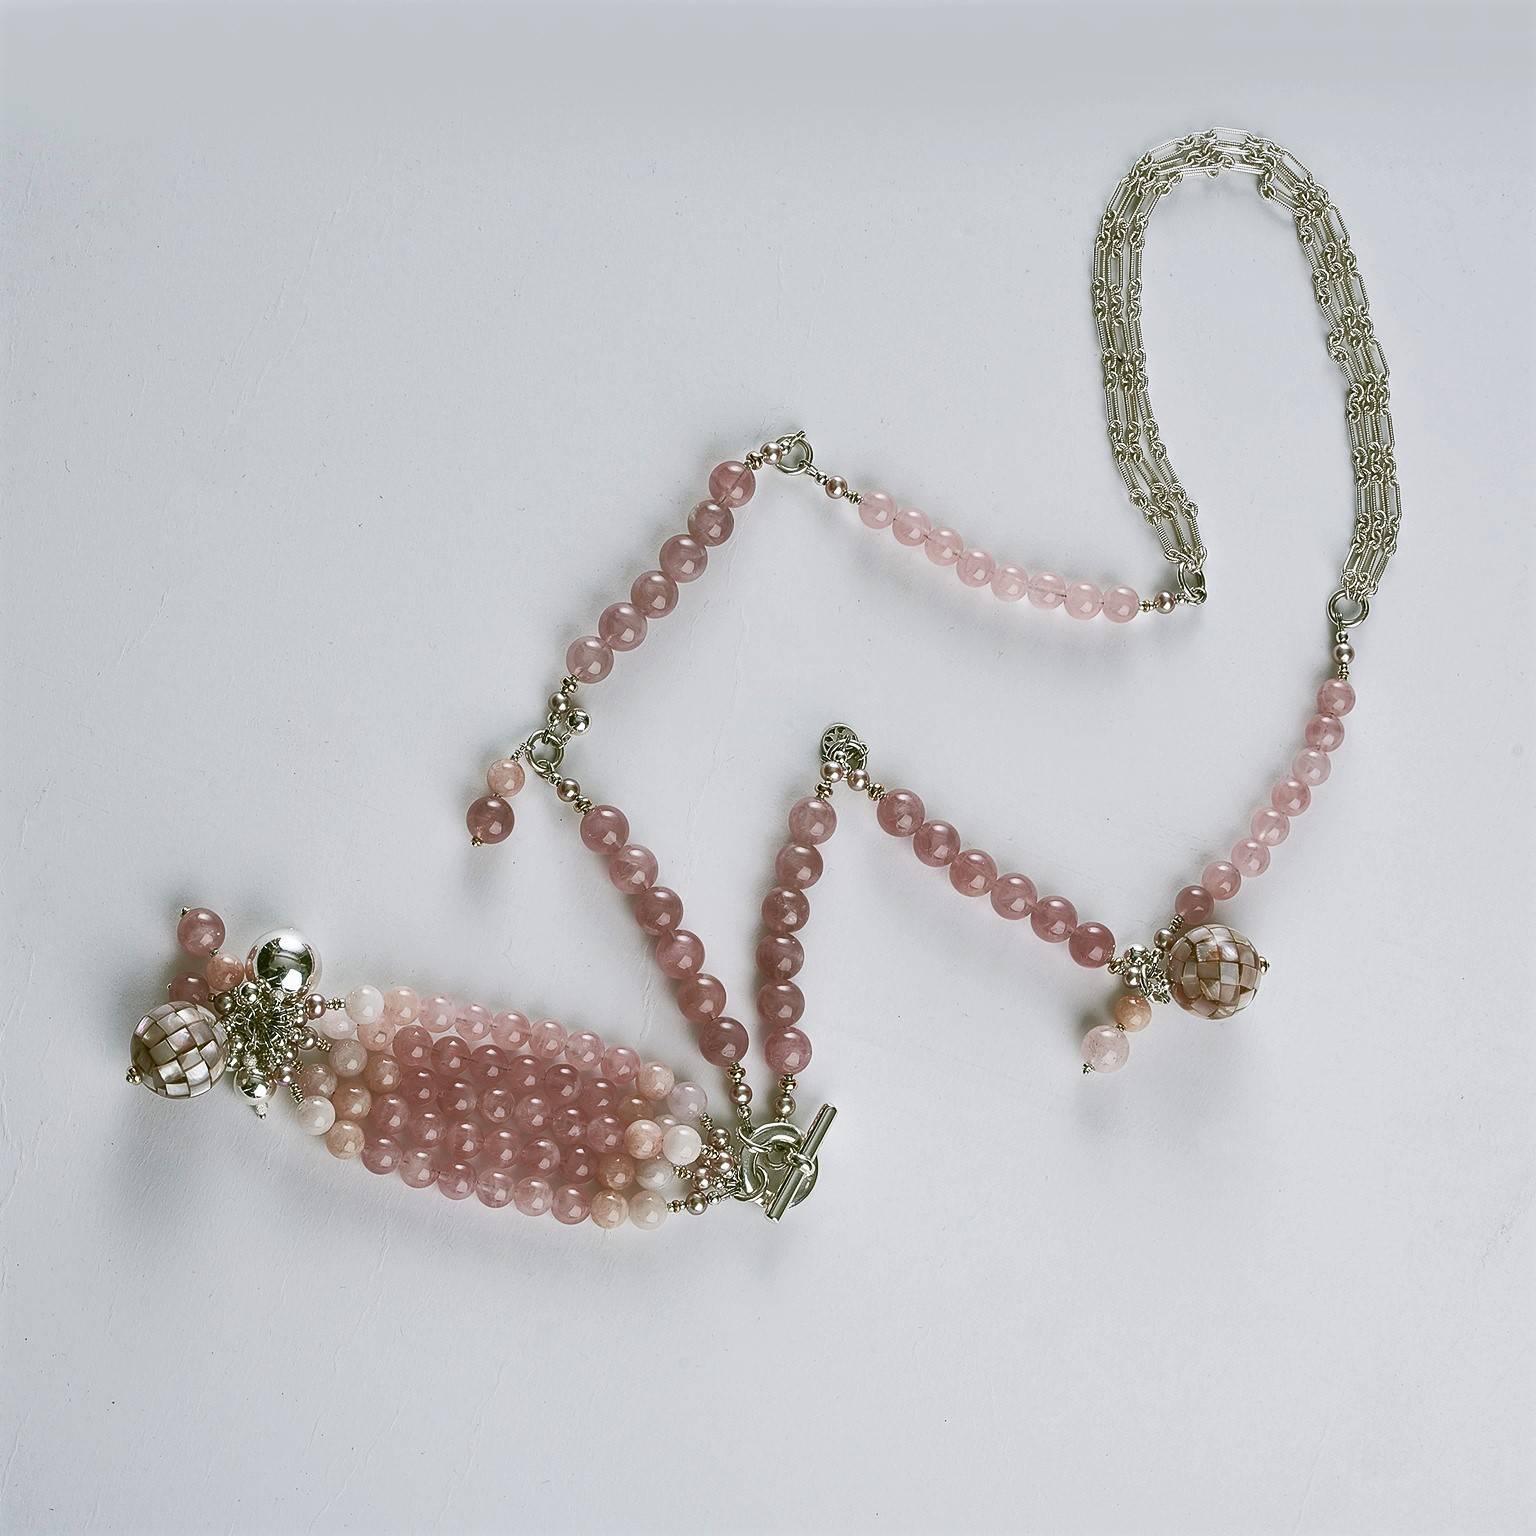 
Grape branch Madagascar rose quartz, morganite & cultured freshwater lavender pearls opera statement tassel necklace.
From three-row sterling silver top chains, six statements of Madagascar rose quartz a graduated from small to large. Cascading